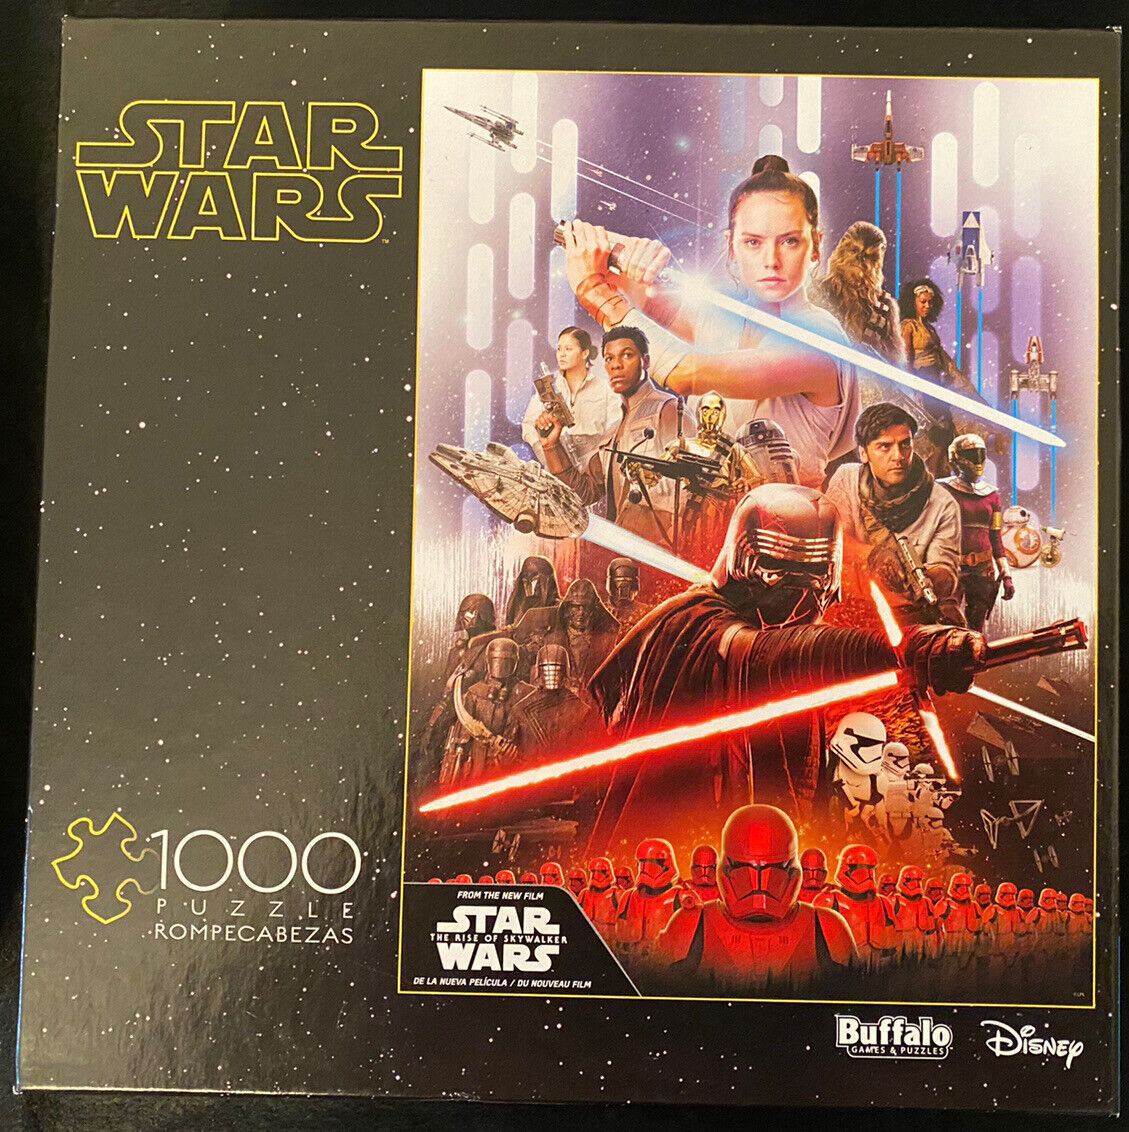 Primary image for Star Wars The Rise Of Skywalker Jigsaw Puzzle 1000 Piece Buffalo Game Disney NEW